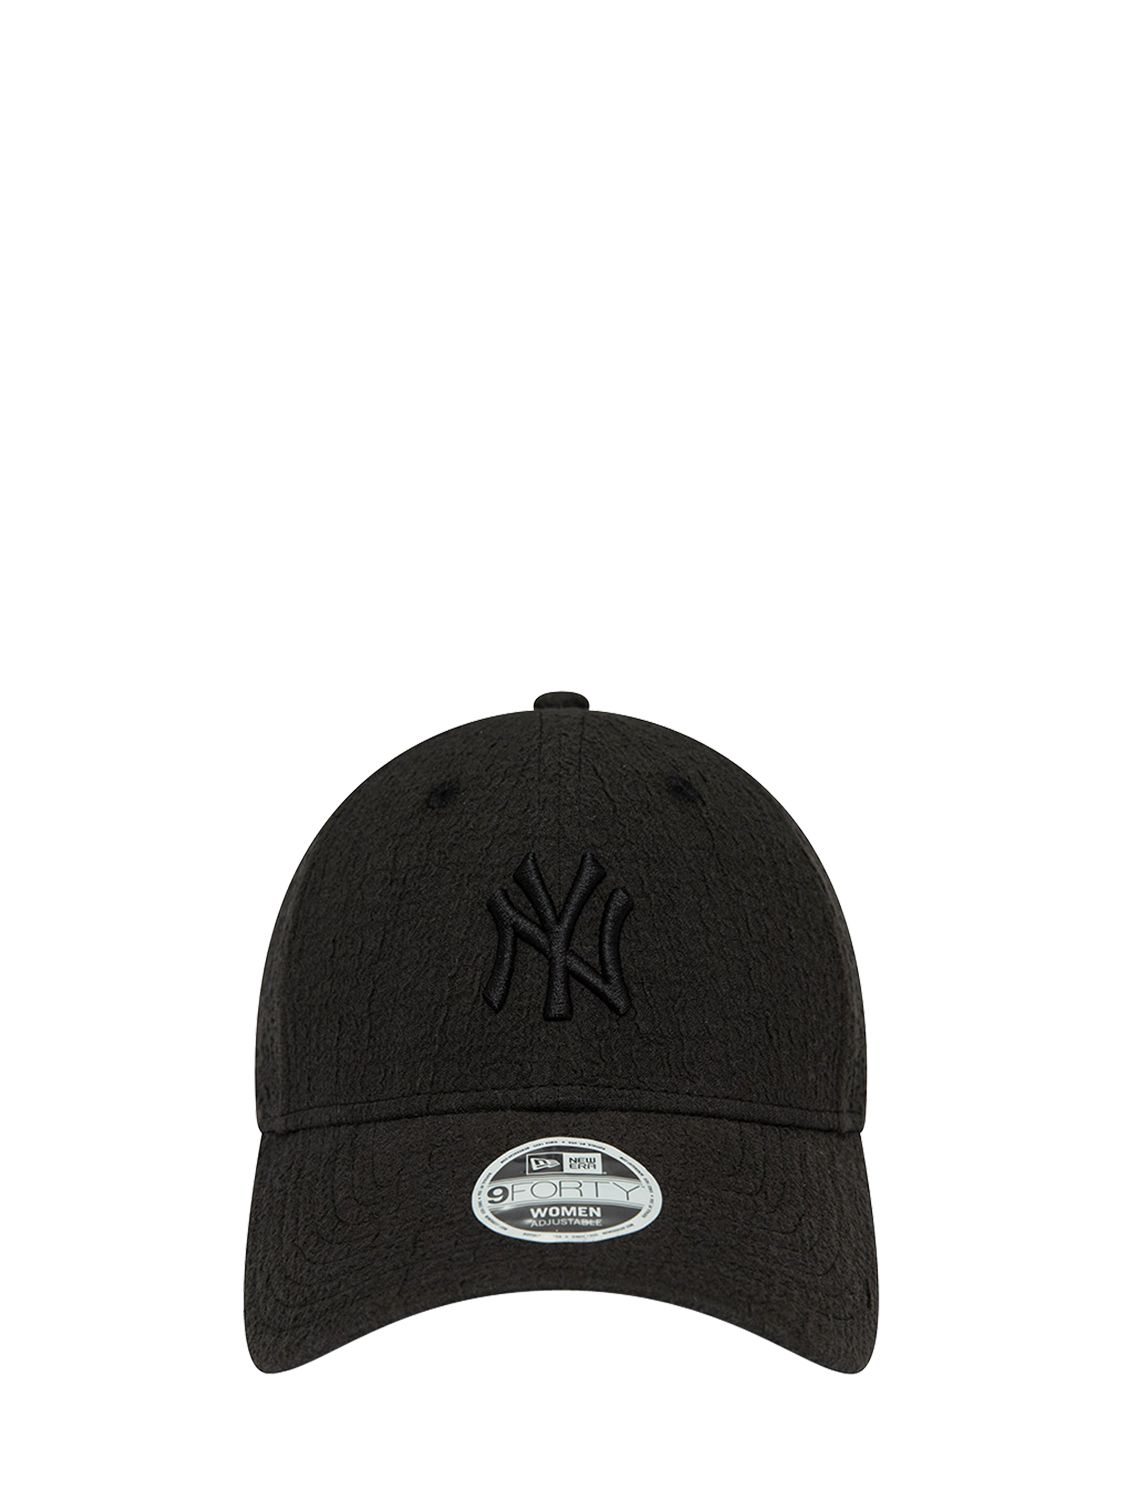 Ny Yankees Bubble Stitch 9forty Hat